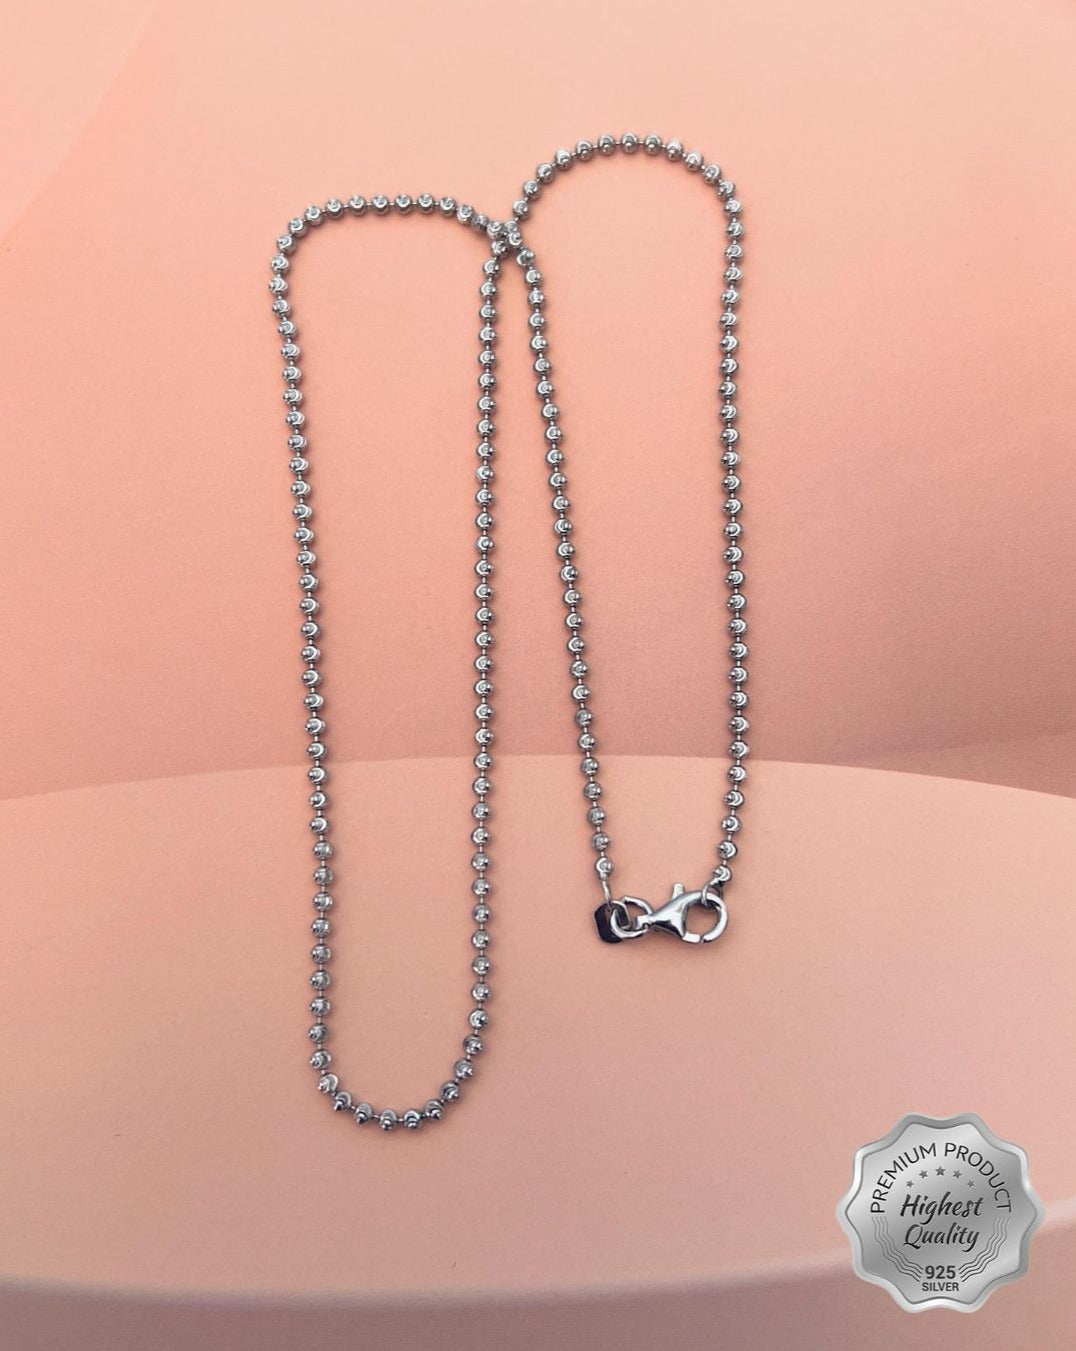 Purest Silver Chain